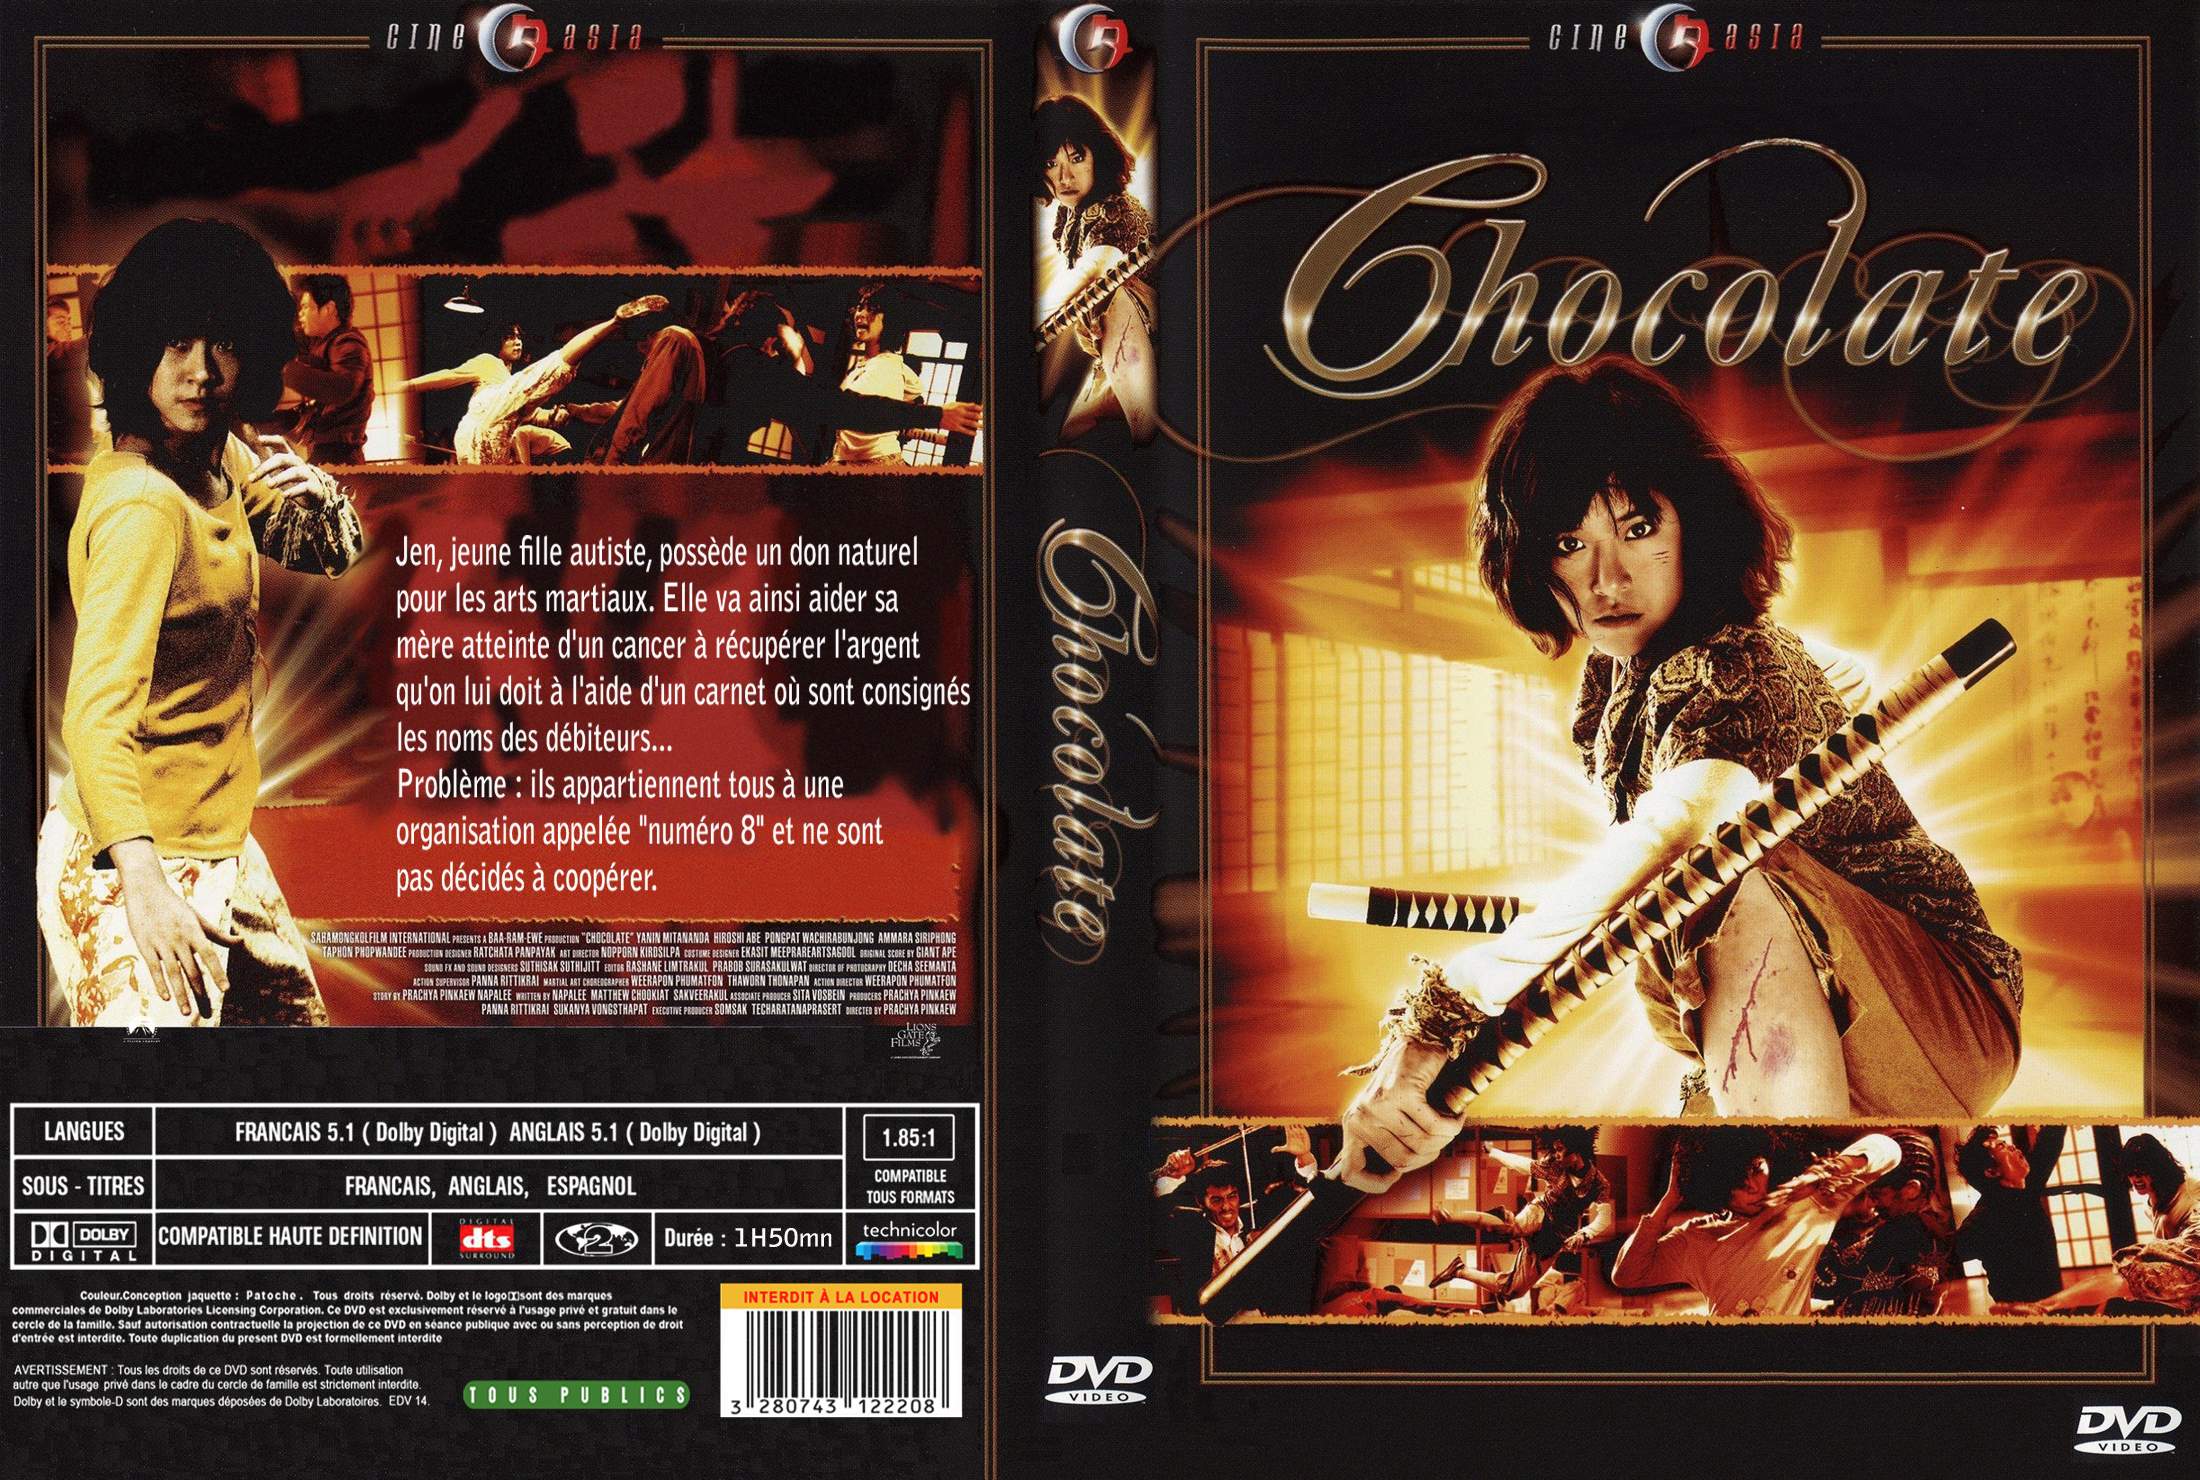 Jaquette DVD Chocolate